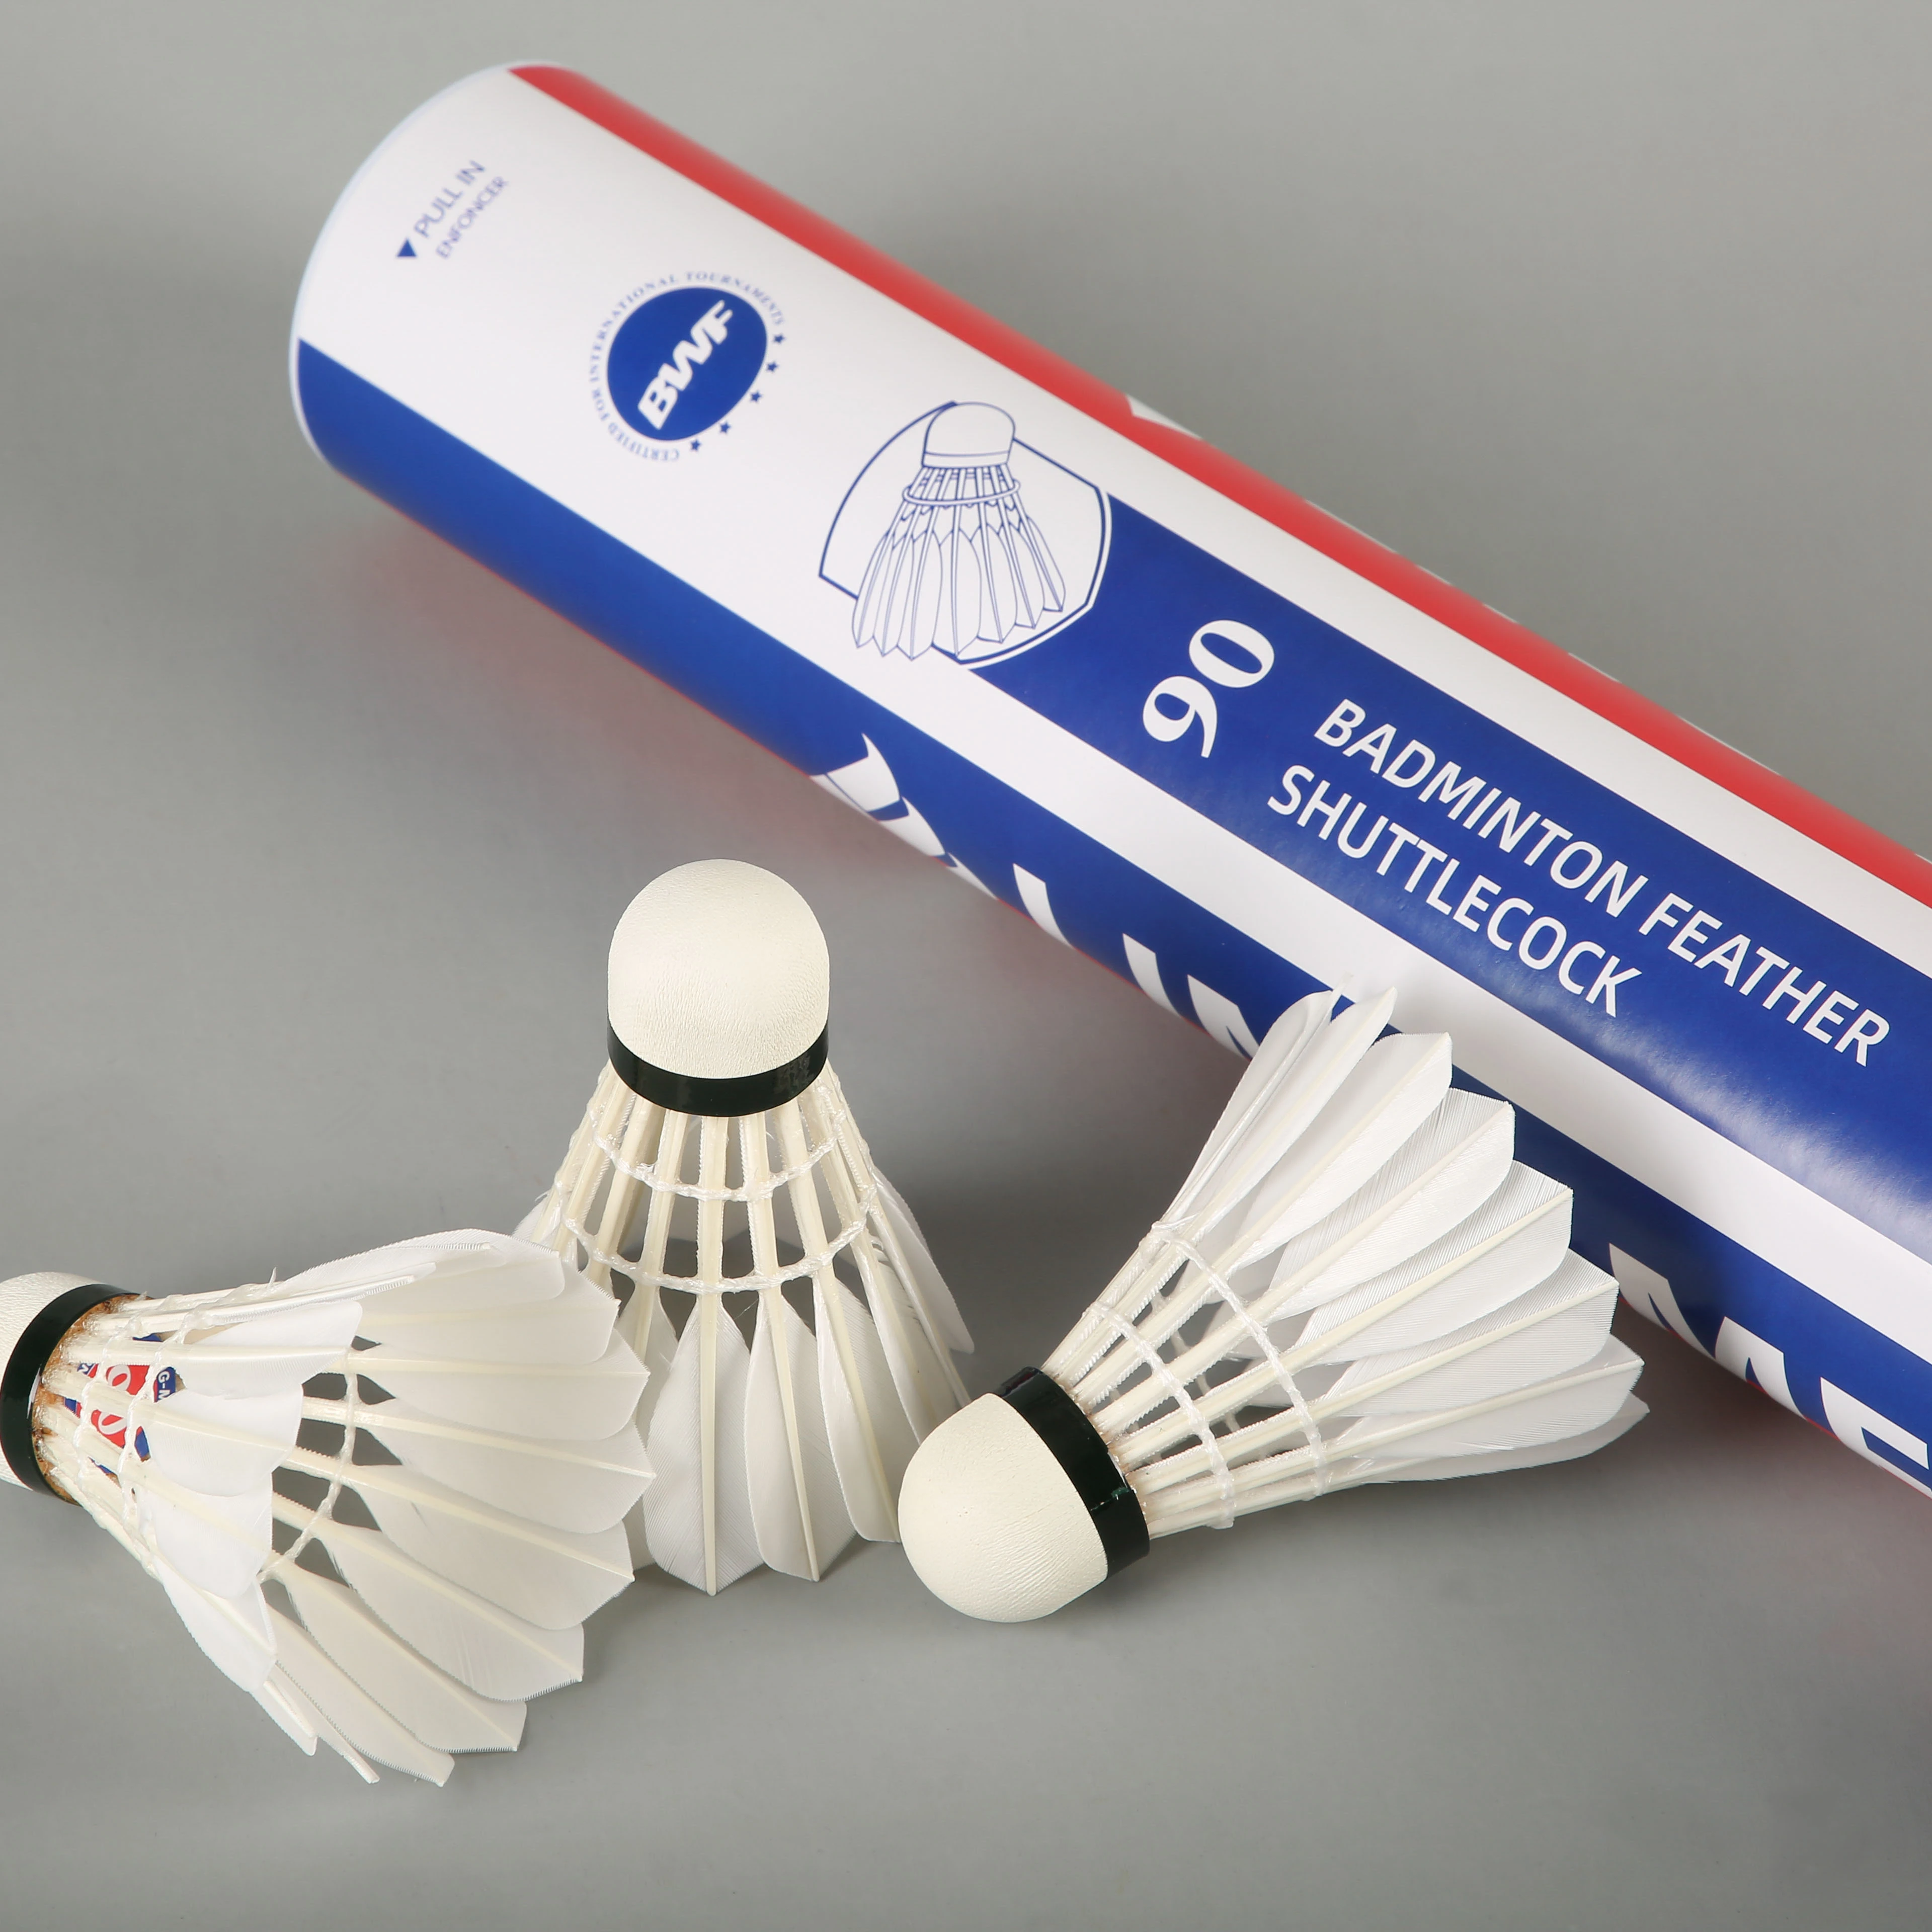 Competitive Price and Durable Badminton as HangYu Shuttlecock lingmei90